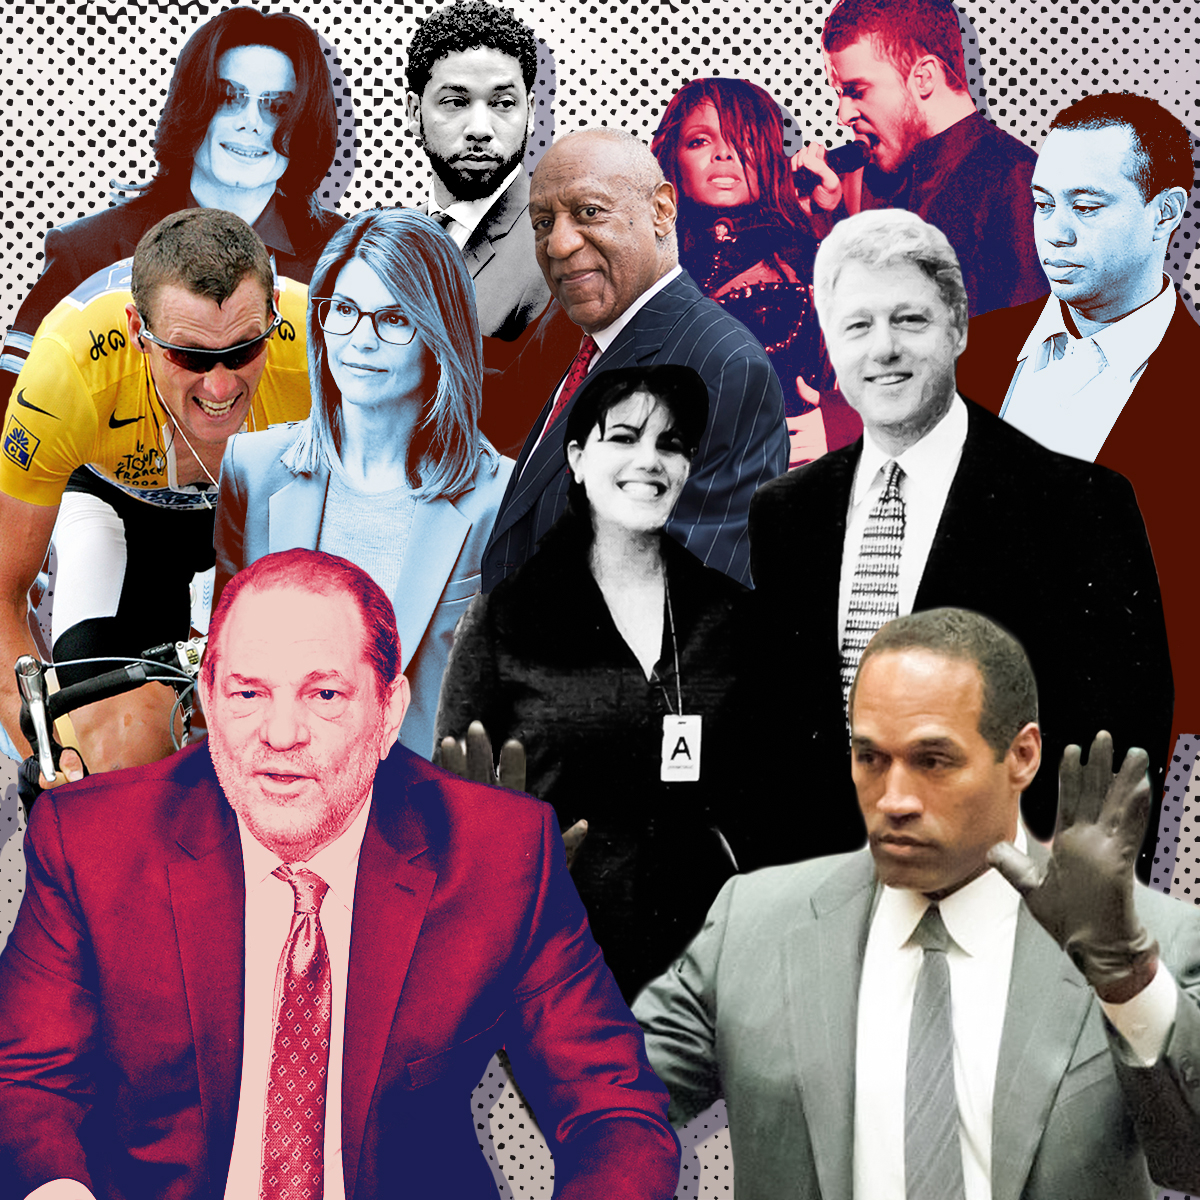 The Most Talked About Scandals To Rock Hollywood the Past 30 Years